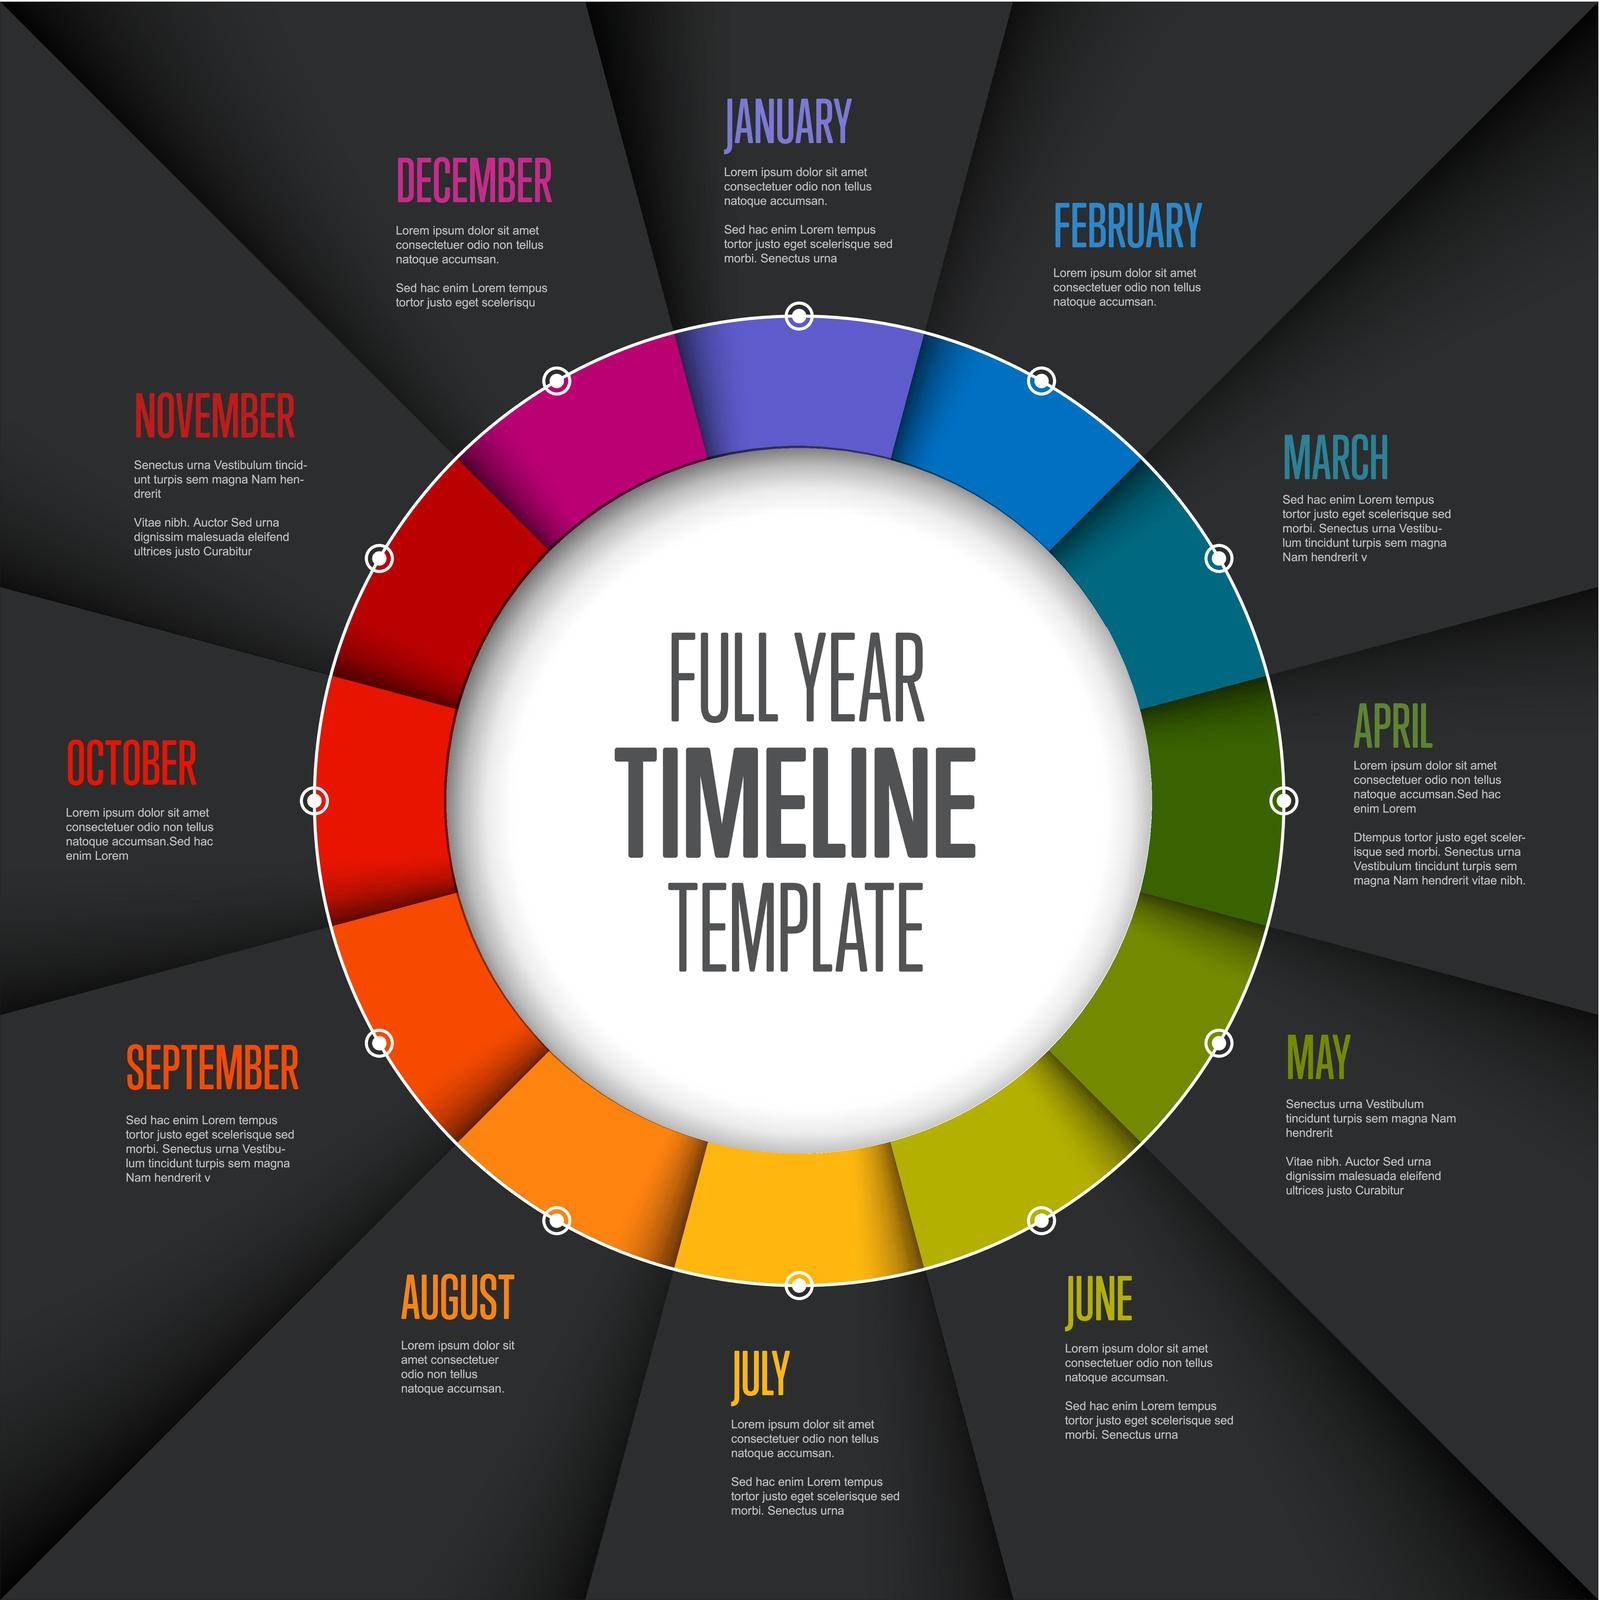 Full year timeline template with all months on circle folded rainbow papers - dark version